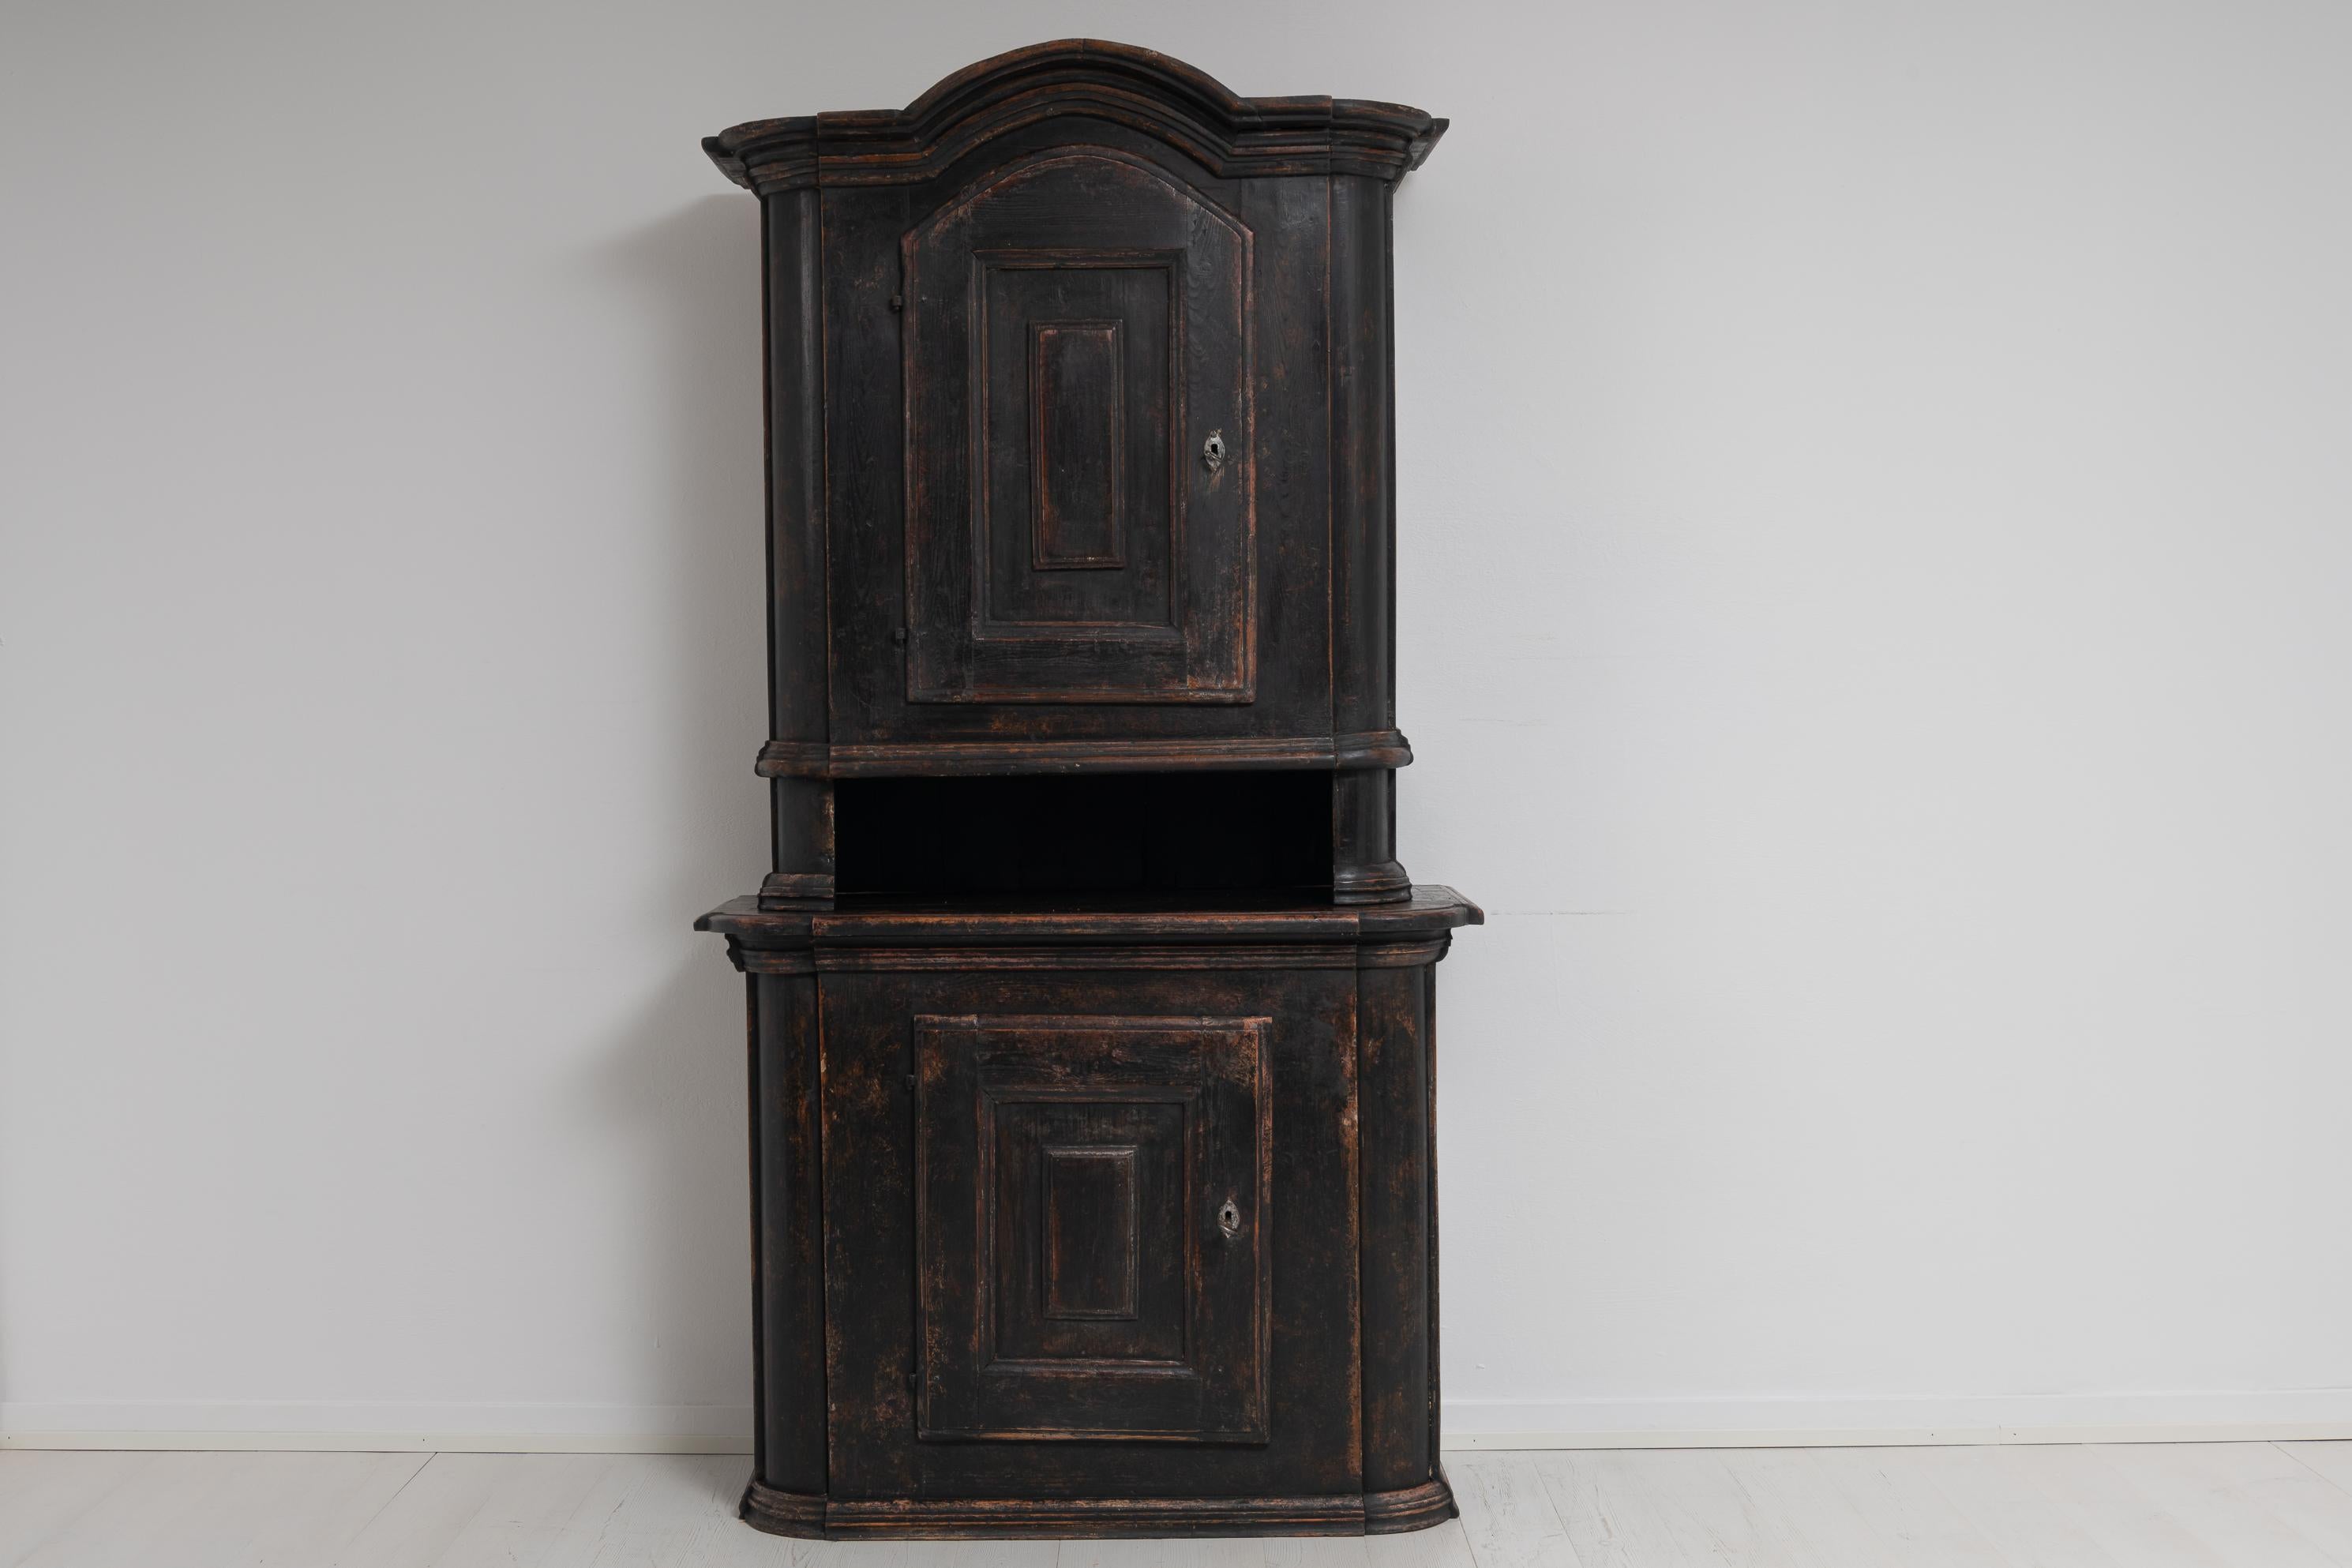 Country house cabinet with distressed black paint from the transitional period between Baroque and Rococo. The cabinet is from Northern Sweden and made during the later part of the 1700s. The cabinet is in 2 parts and made in painted pine. Later